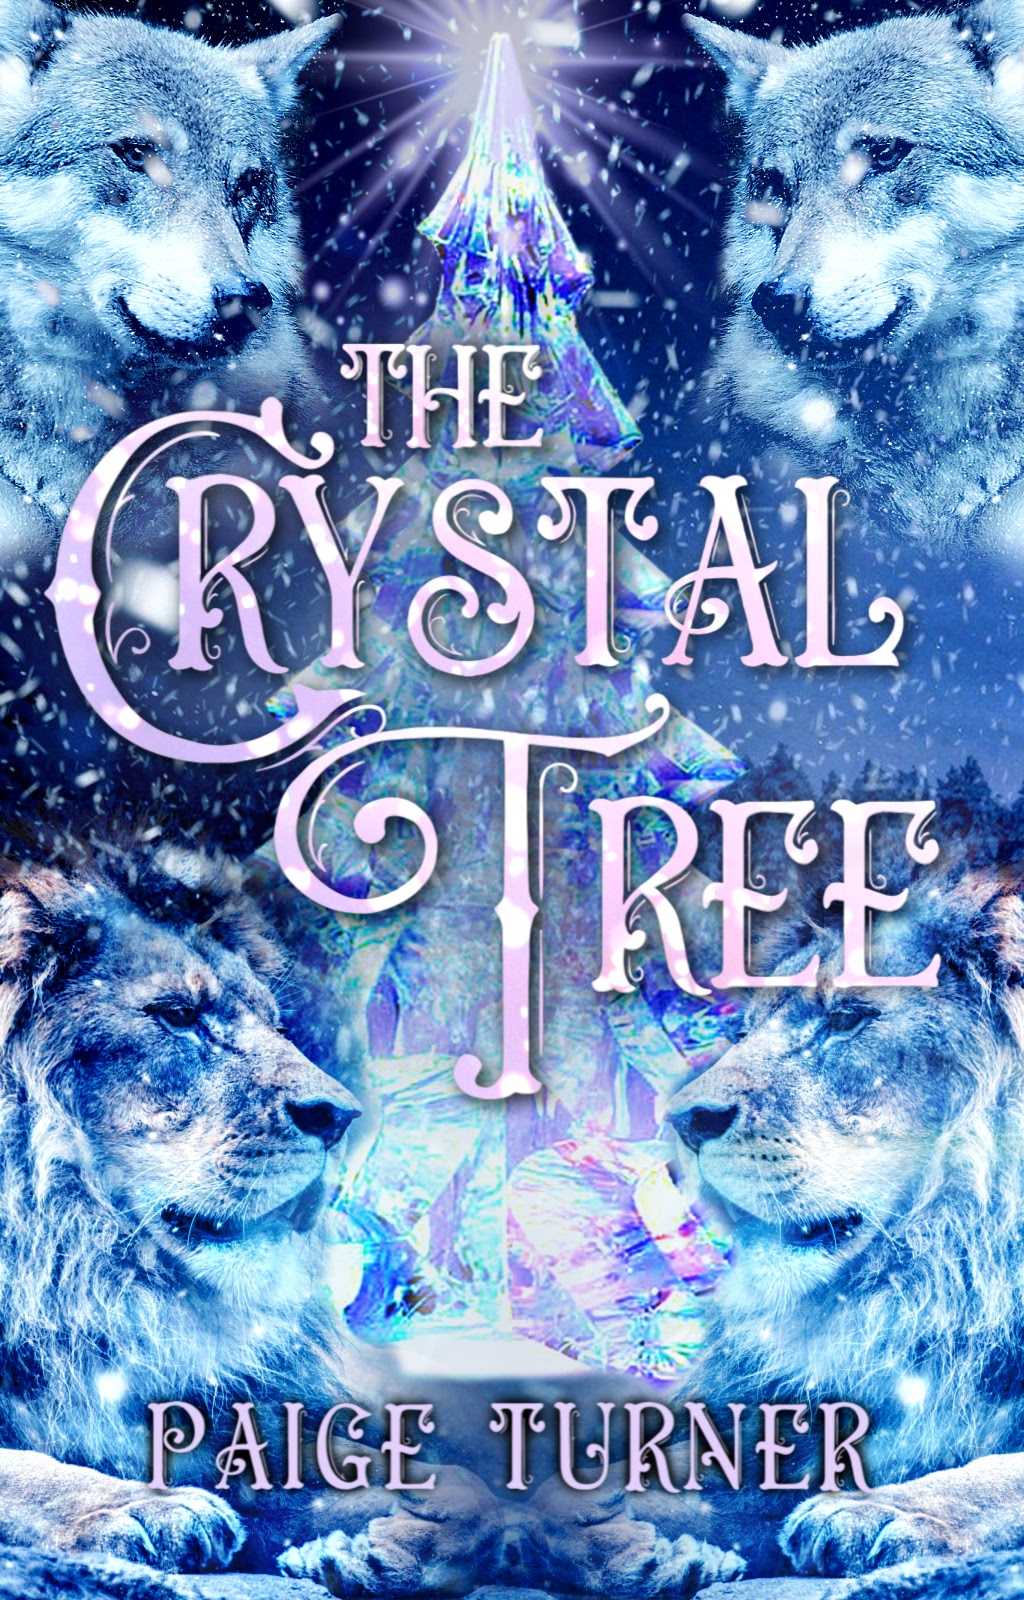 197-617-the-crystal-tree-cover-2.jpg